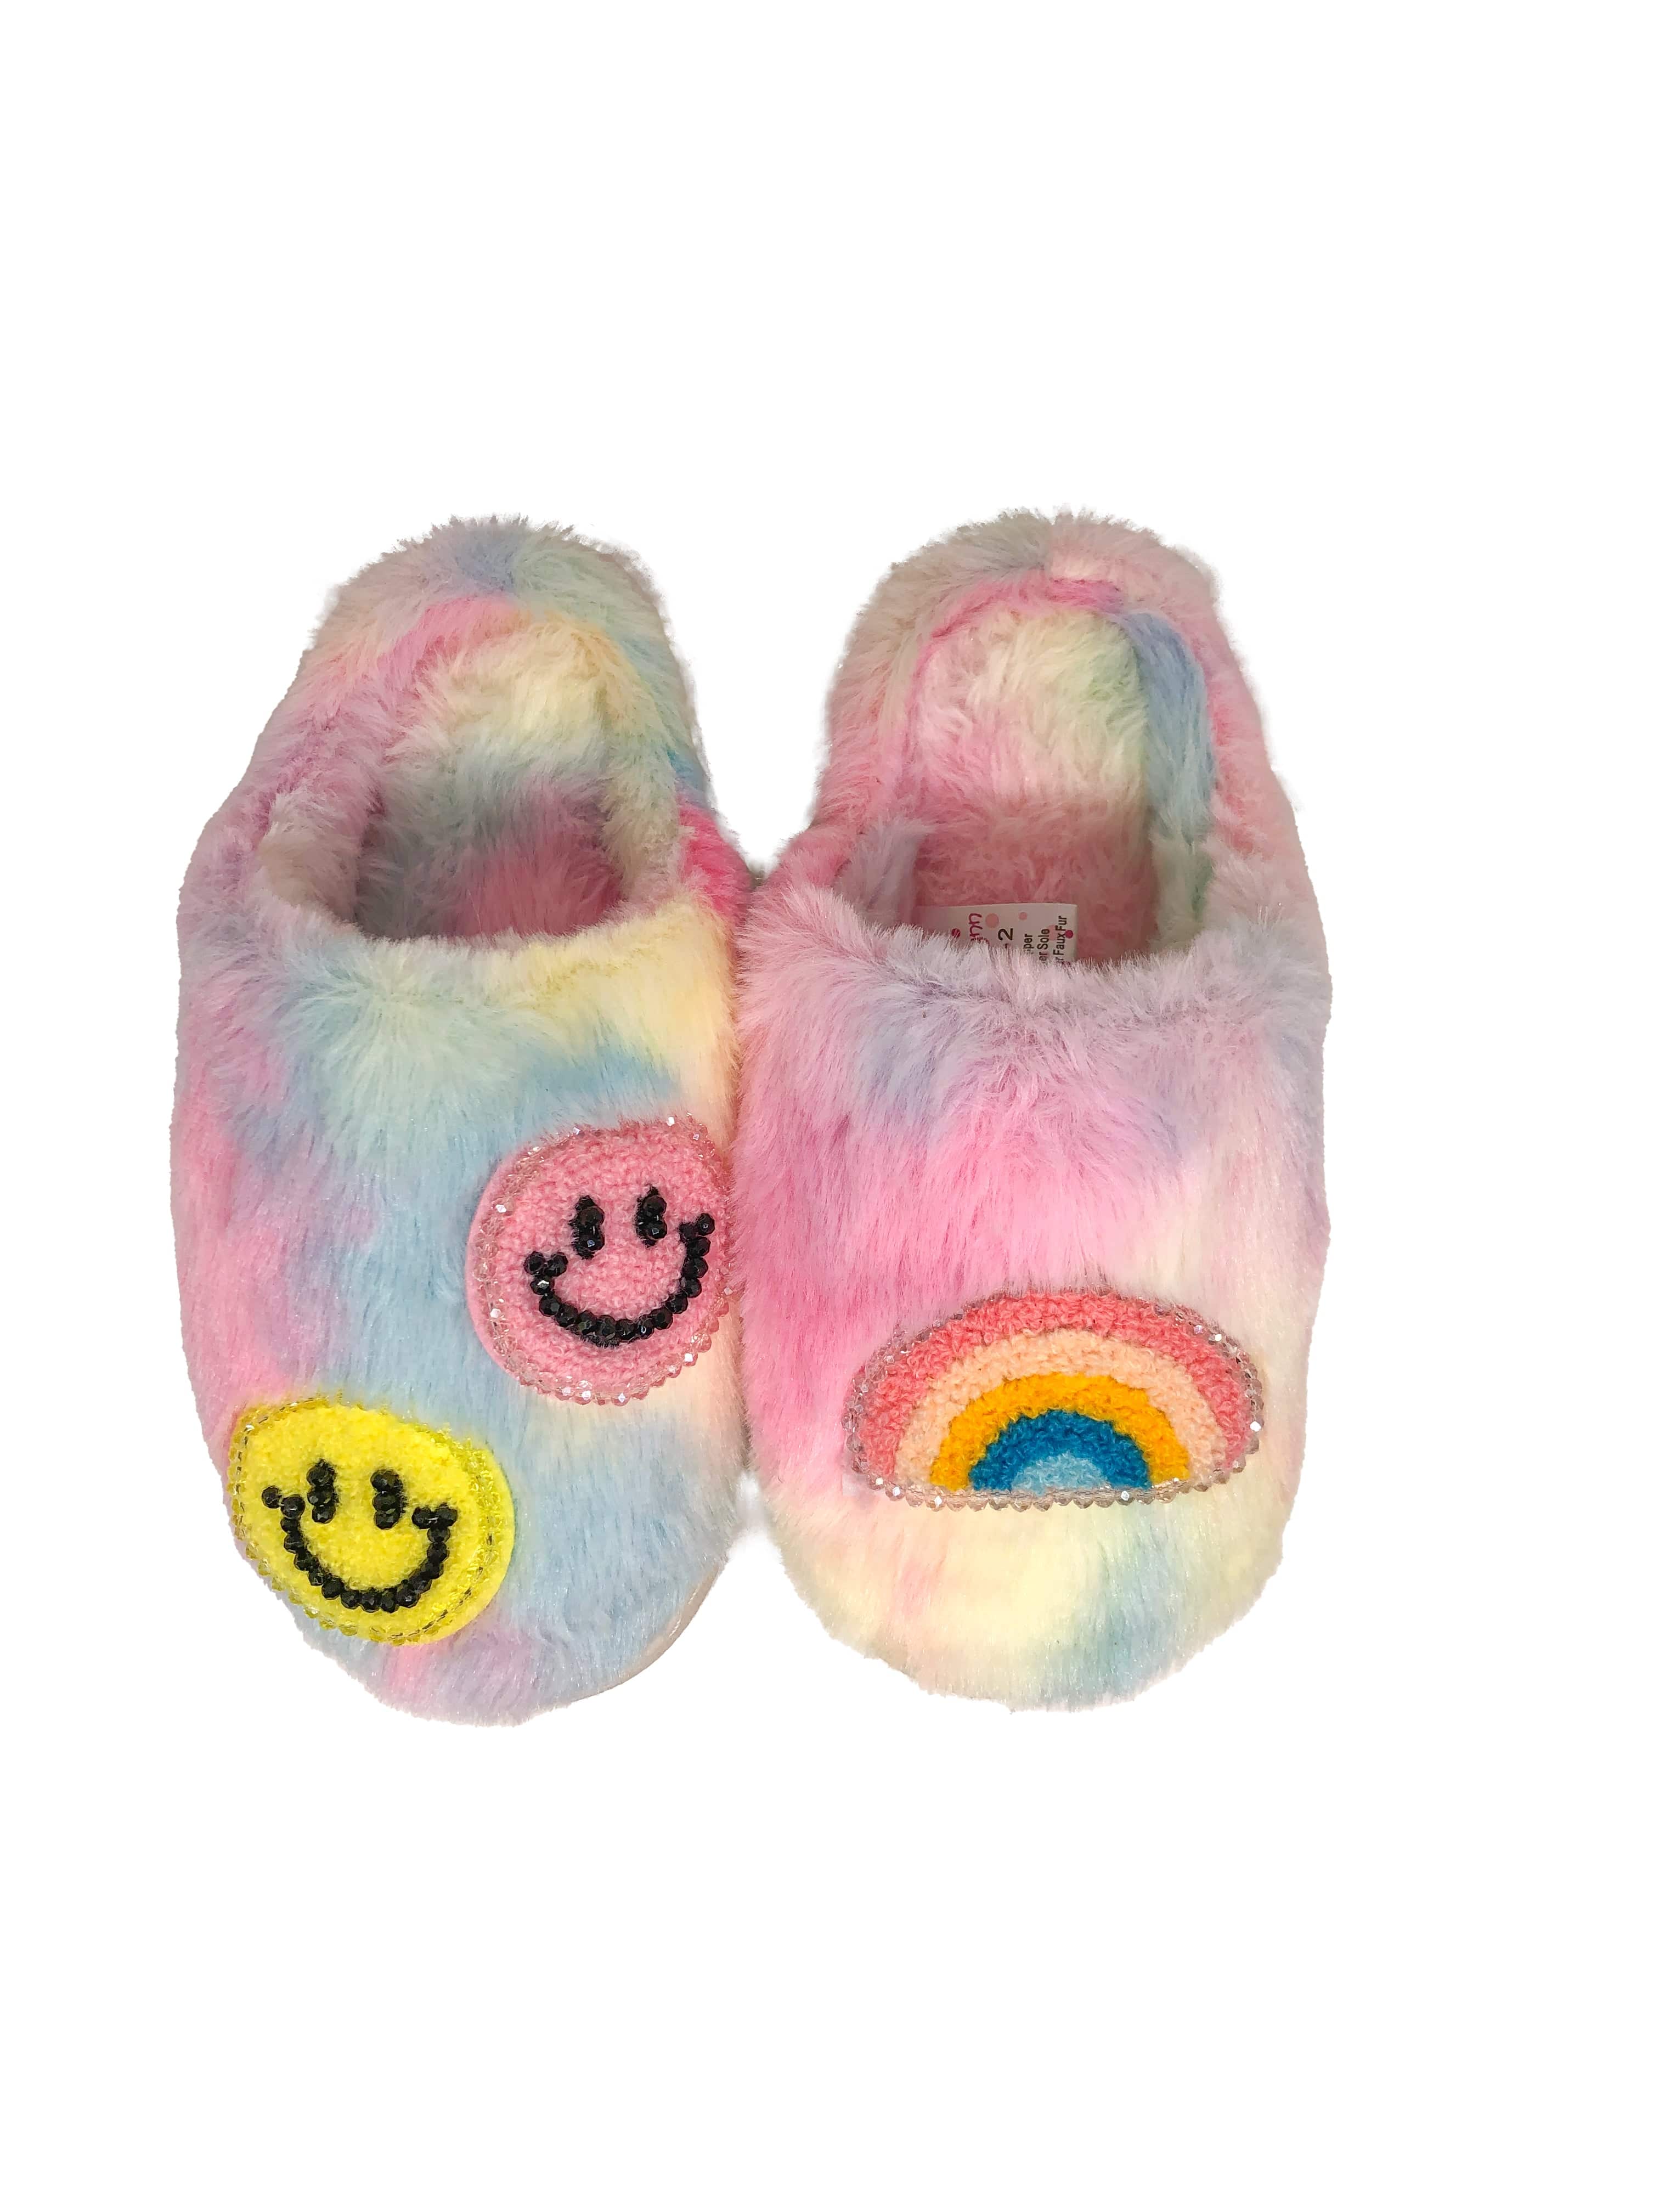 Girl's Embroidered Tie Dye Furry Patched Slippers - Twinkle Twinkle Little One